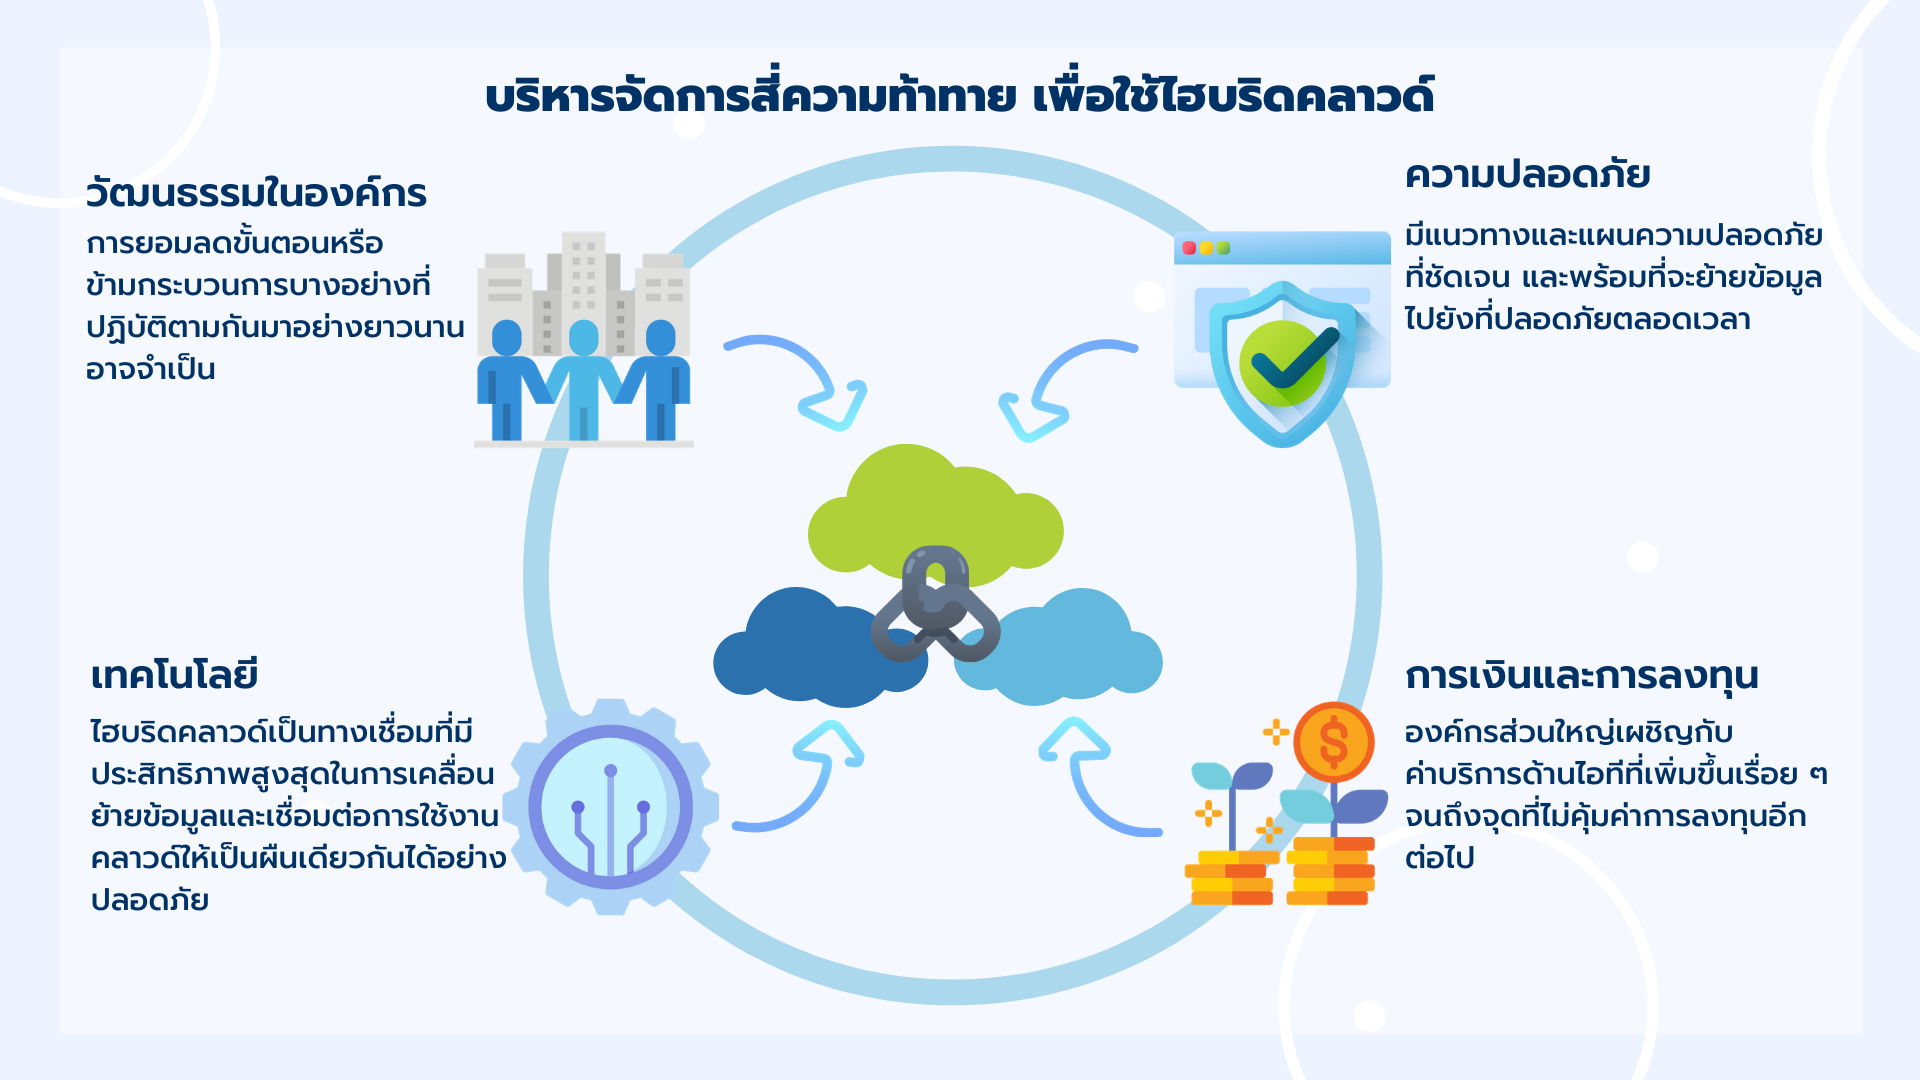 Building a reliable IT ecosystem for the Thai public health sector